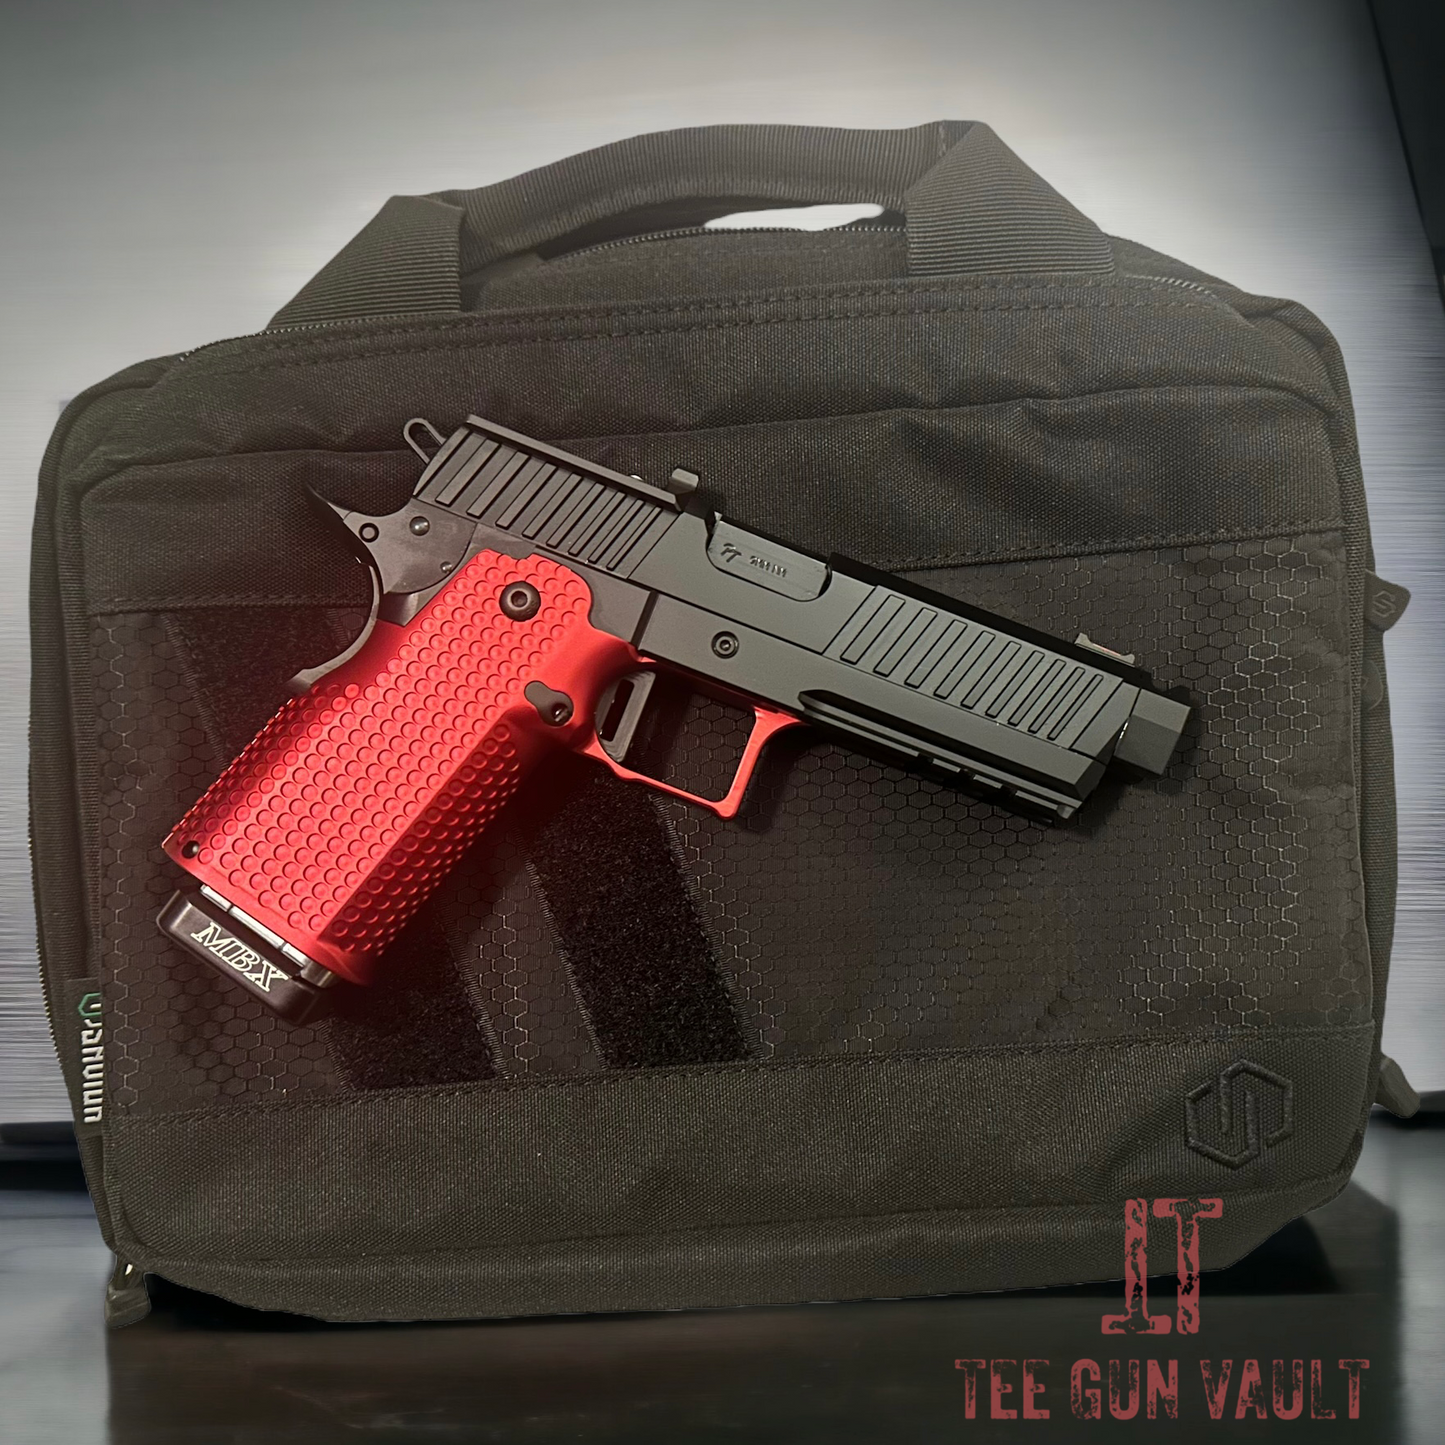 Phoenix Trinity Morph Switch 9mm compensated optic ready red grips upgrade